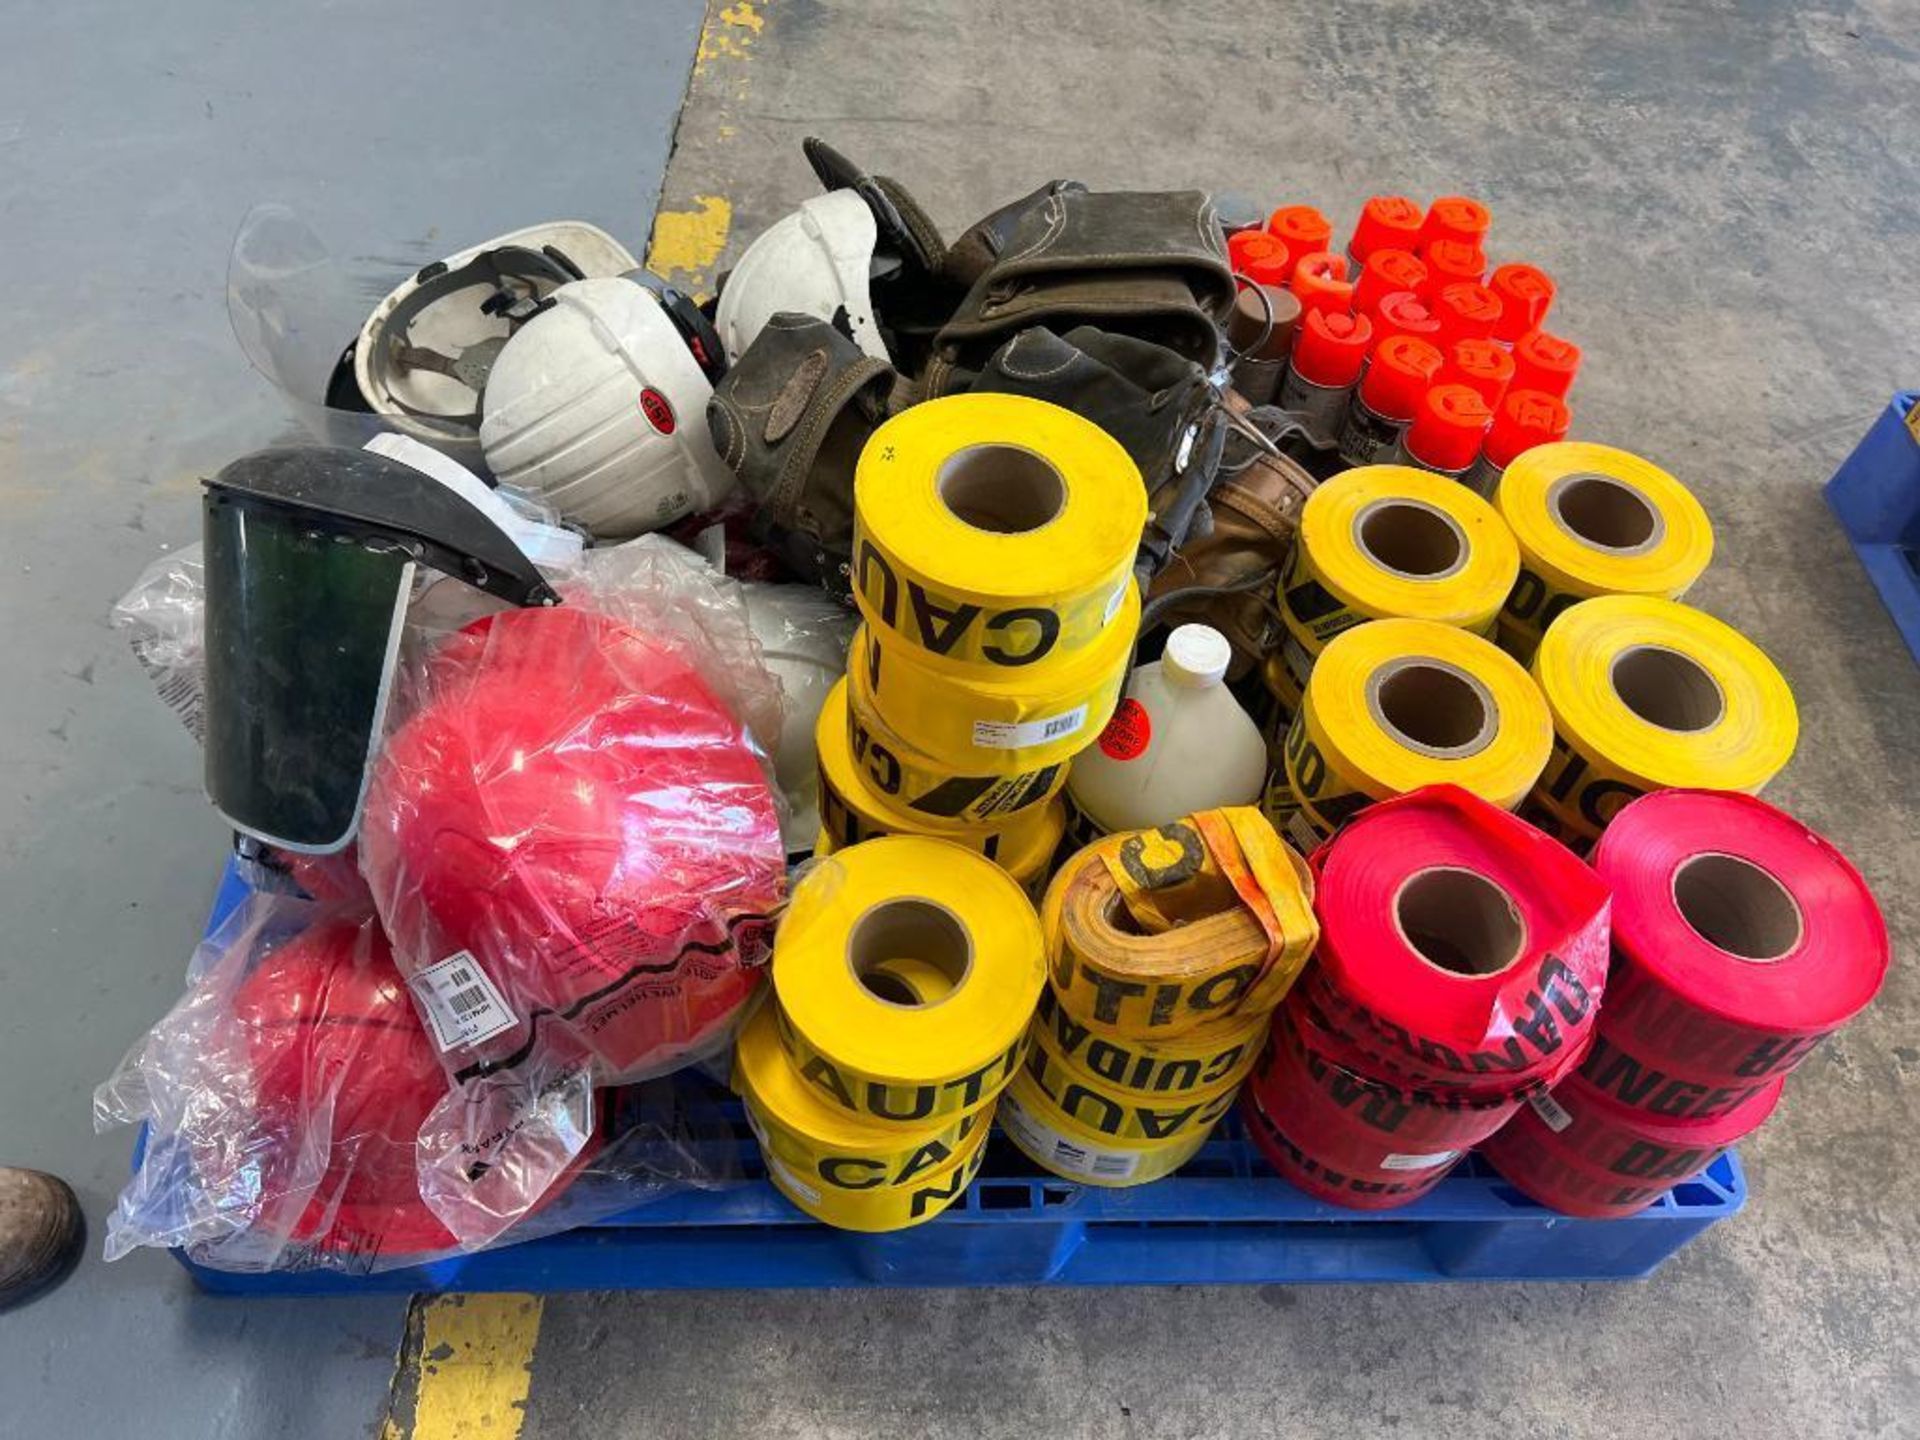 Pallet of Miscellaneous Safety Equipment. New & Used Hard Hats, Caution Tape, Marker Paint, Knee Pad